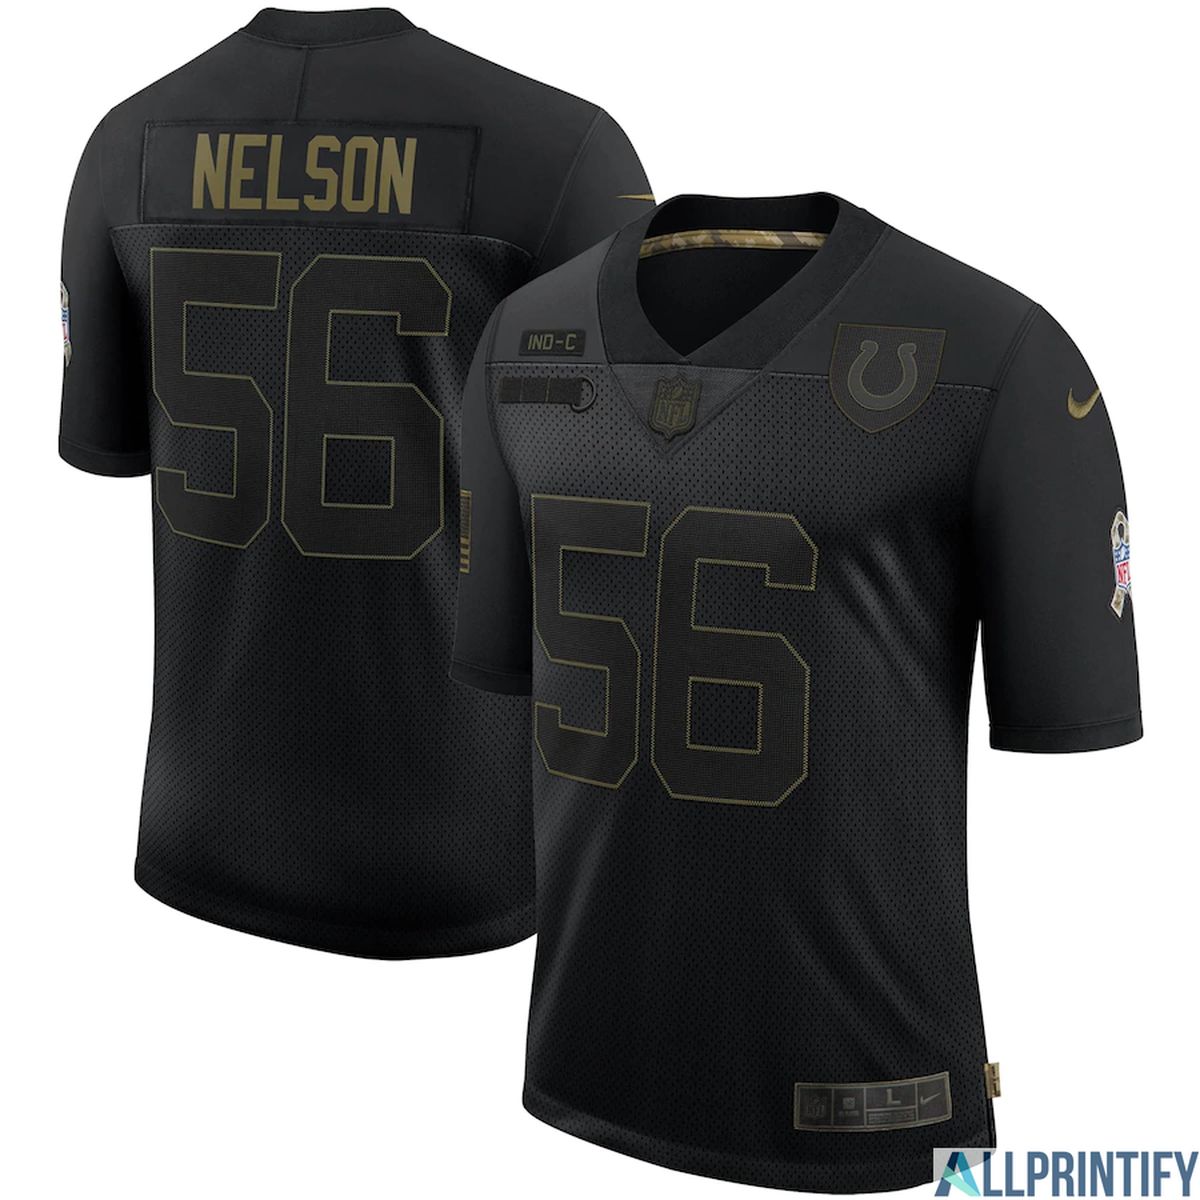 Quenton Nelson Indianapolis Colts 56 Black Vapor Limited Jersey